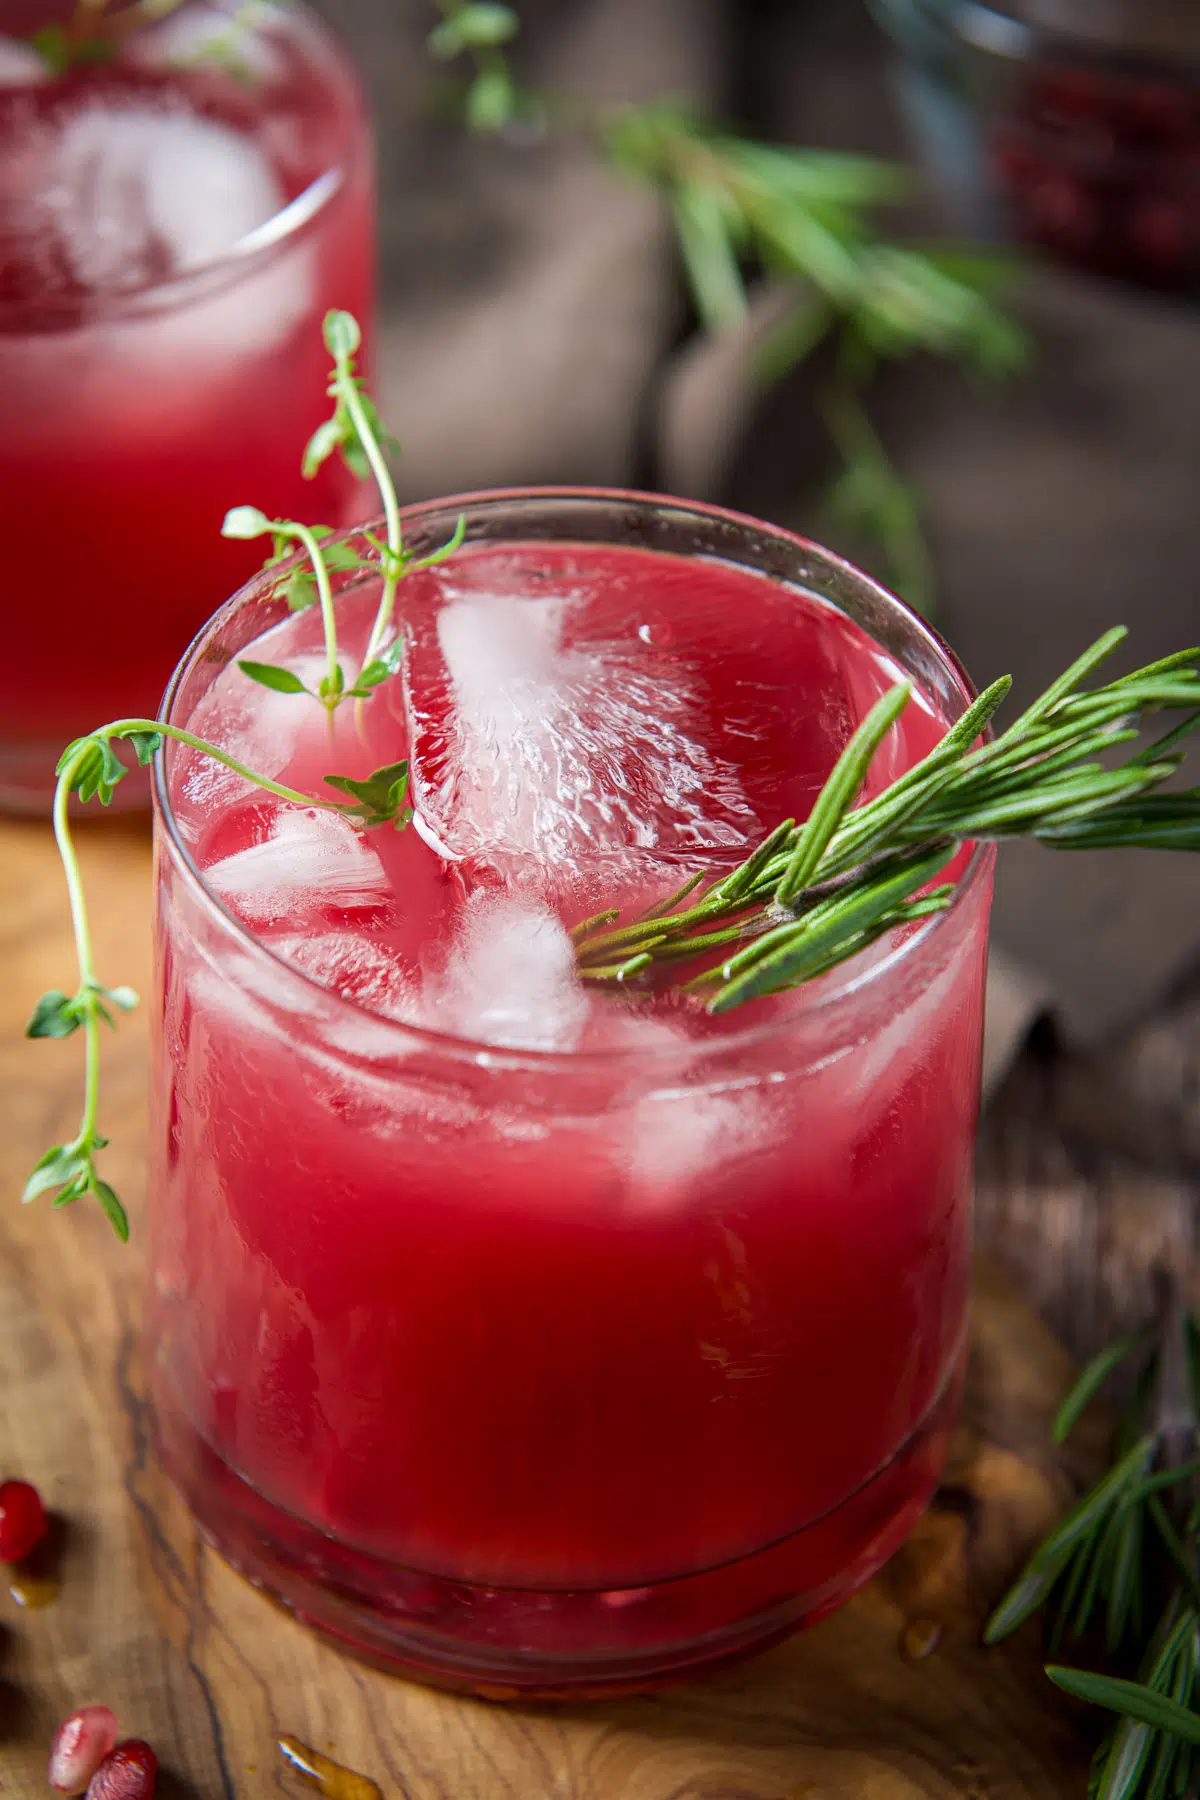 Close up of the red cocktail in a glass with fresh thyme and rosemary